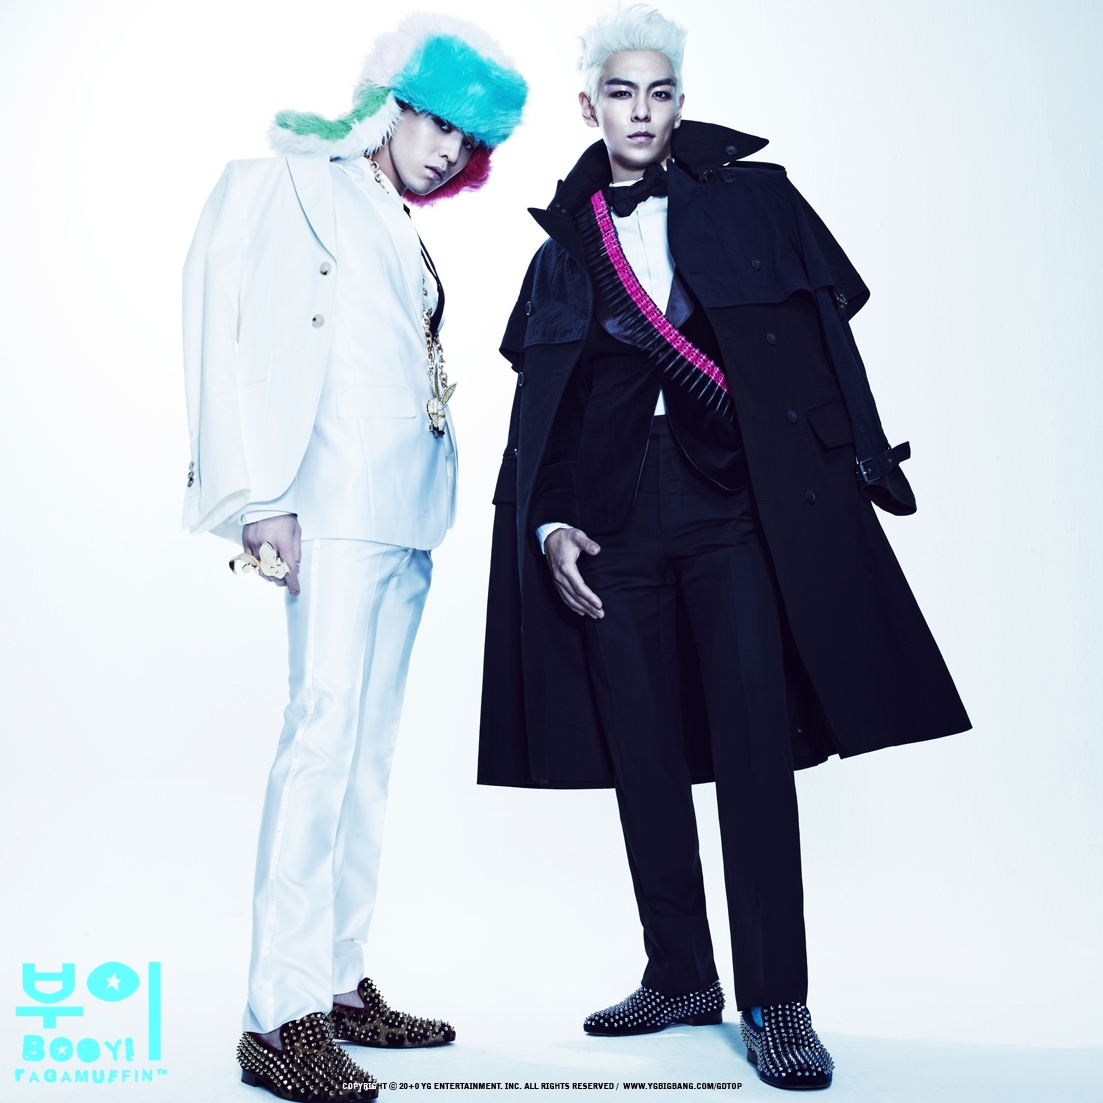 Videos] GD and TOP revealed the making videos of “Don't Go Home” + “High  High” + “Knock Out”! | Daily K Pop News